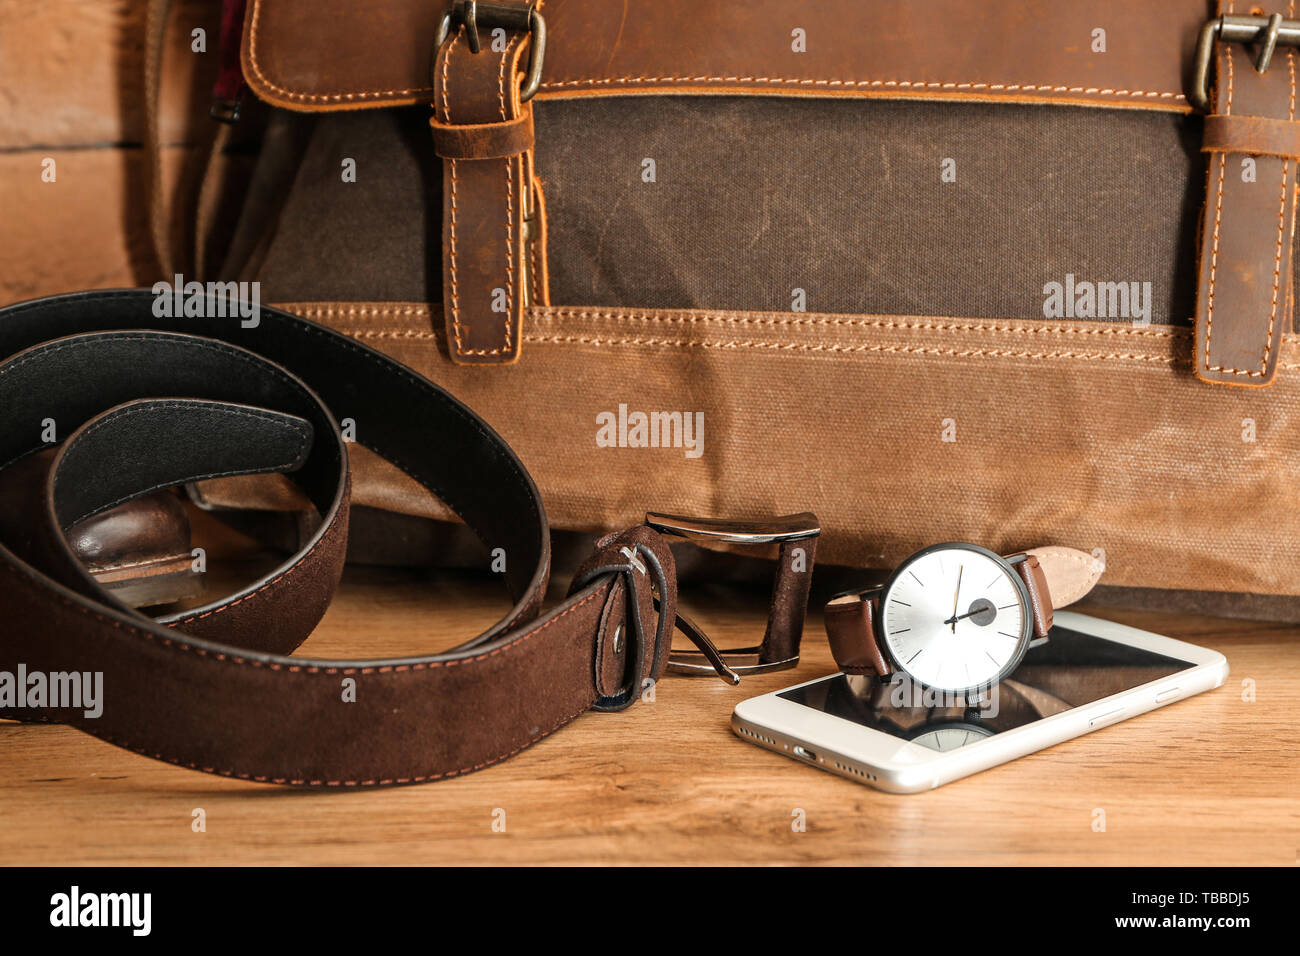 Business man accessories stock image. Image of modern - 140144617